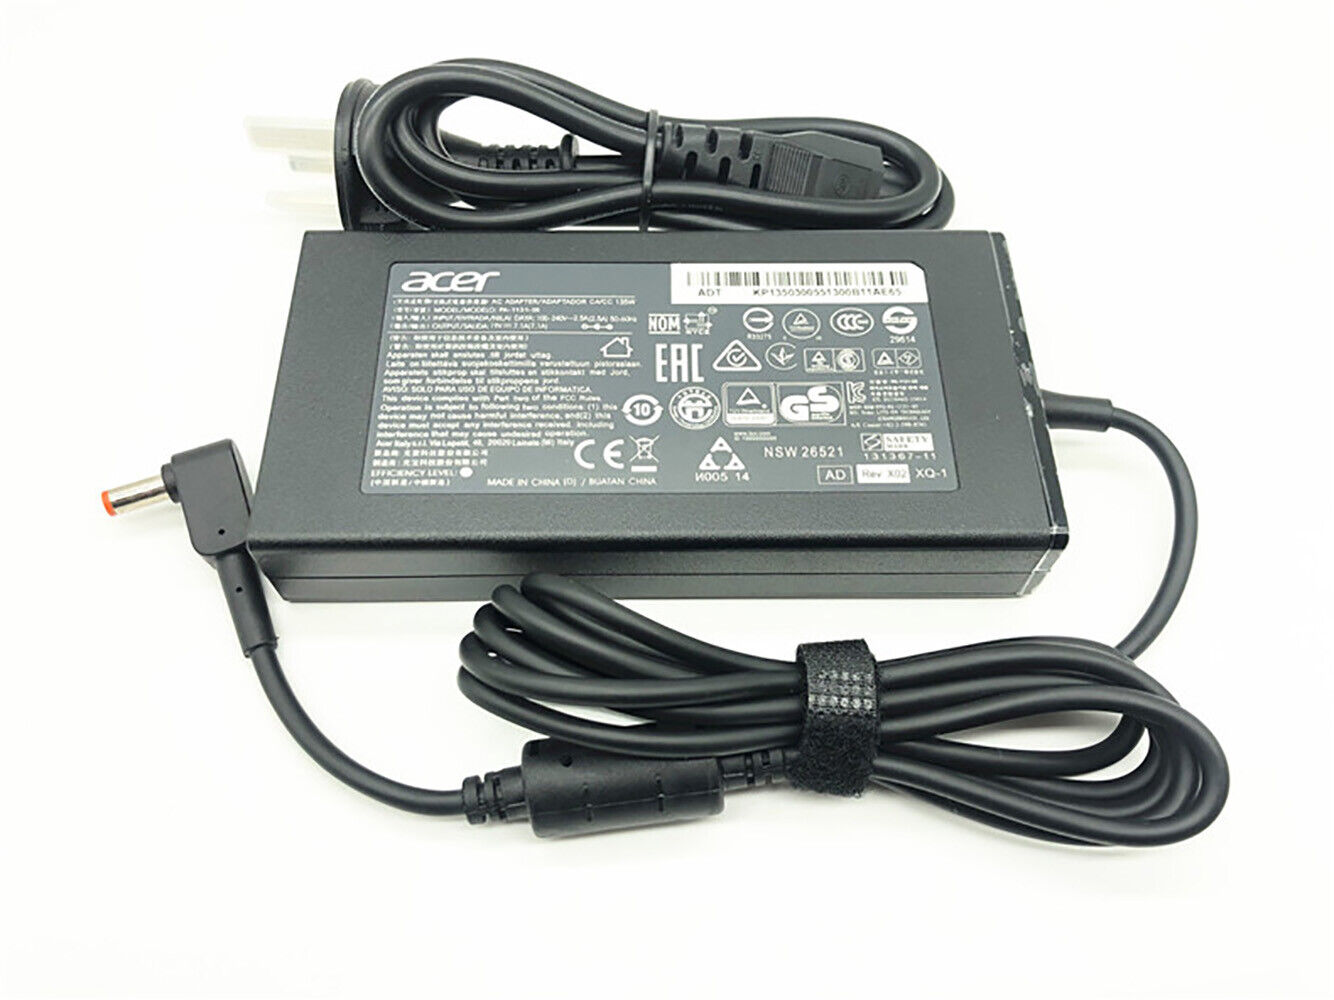 Genuine Acer 135W Laptop Charger for Predator Helios 300 Aspire 7 5.5*2.5mm